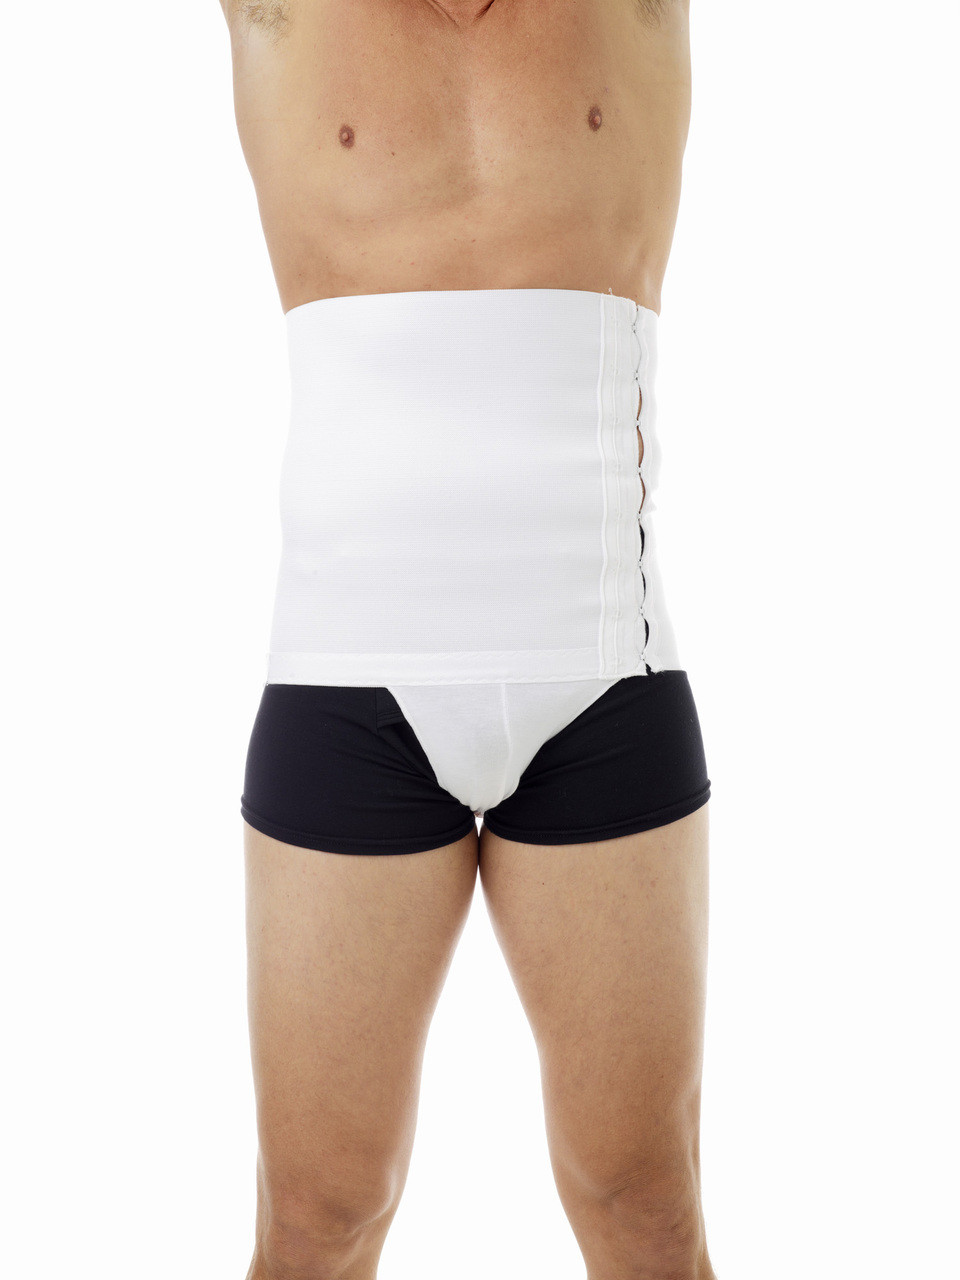 MEN'S GIRDLE BELLYBUSTER with JOCK STRAP